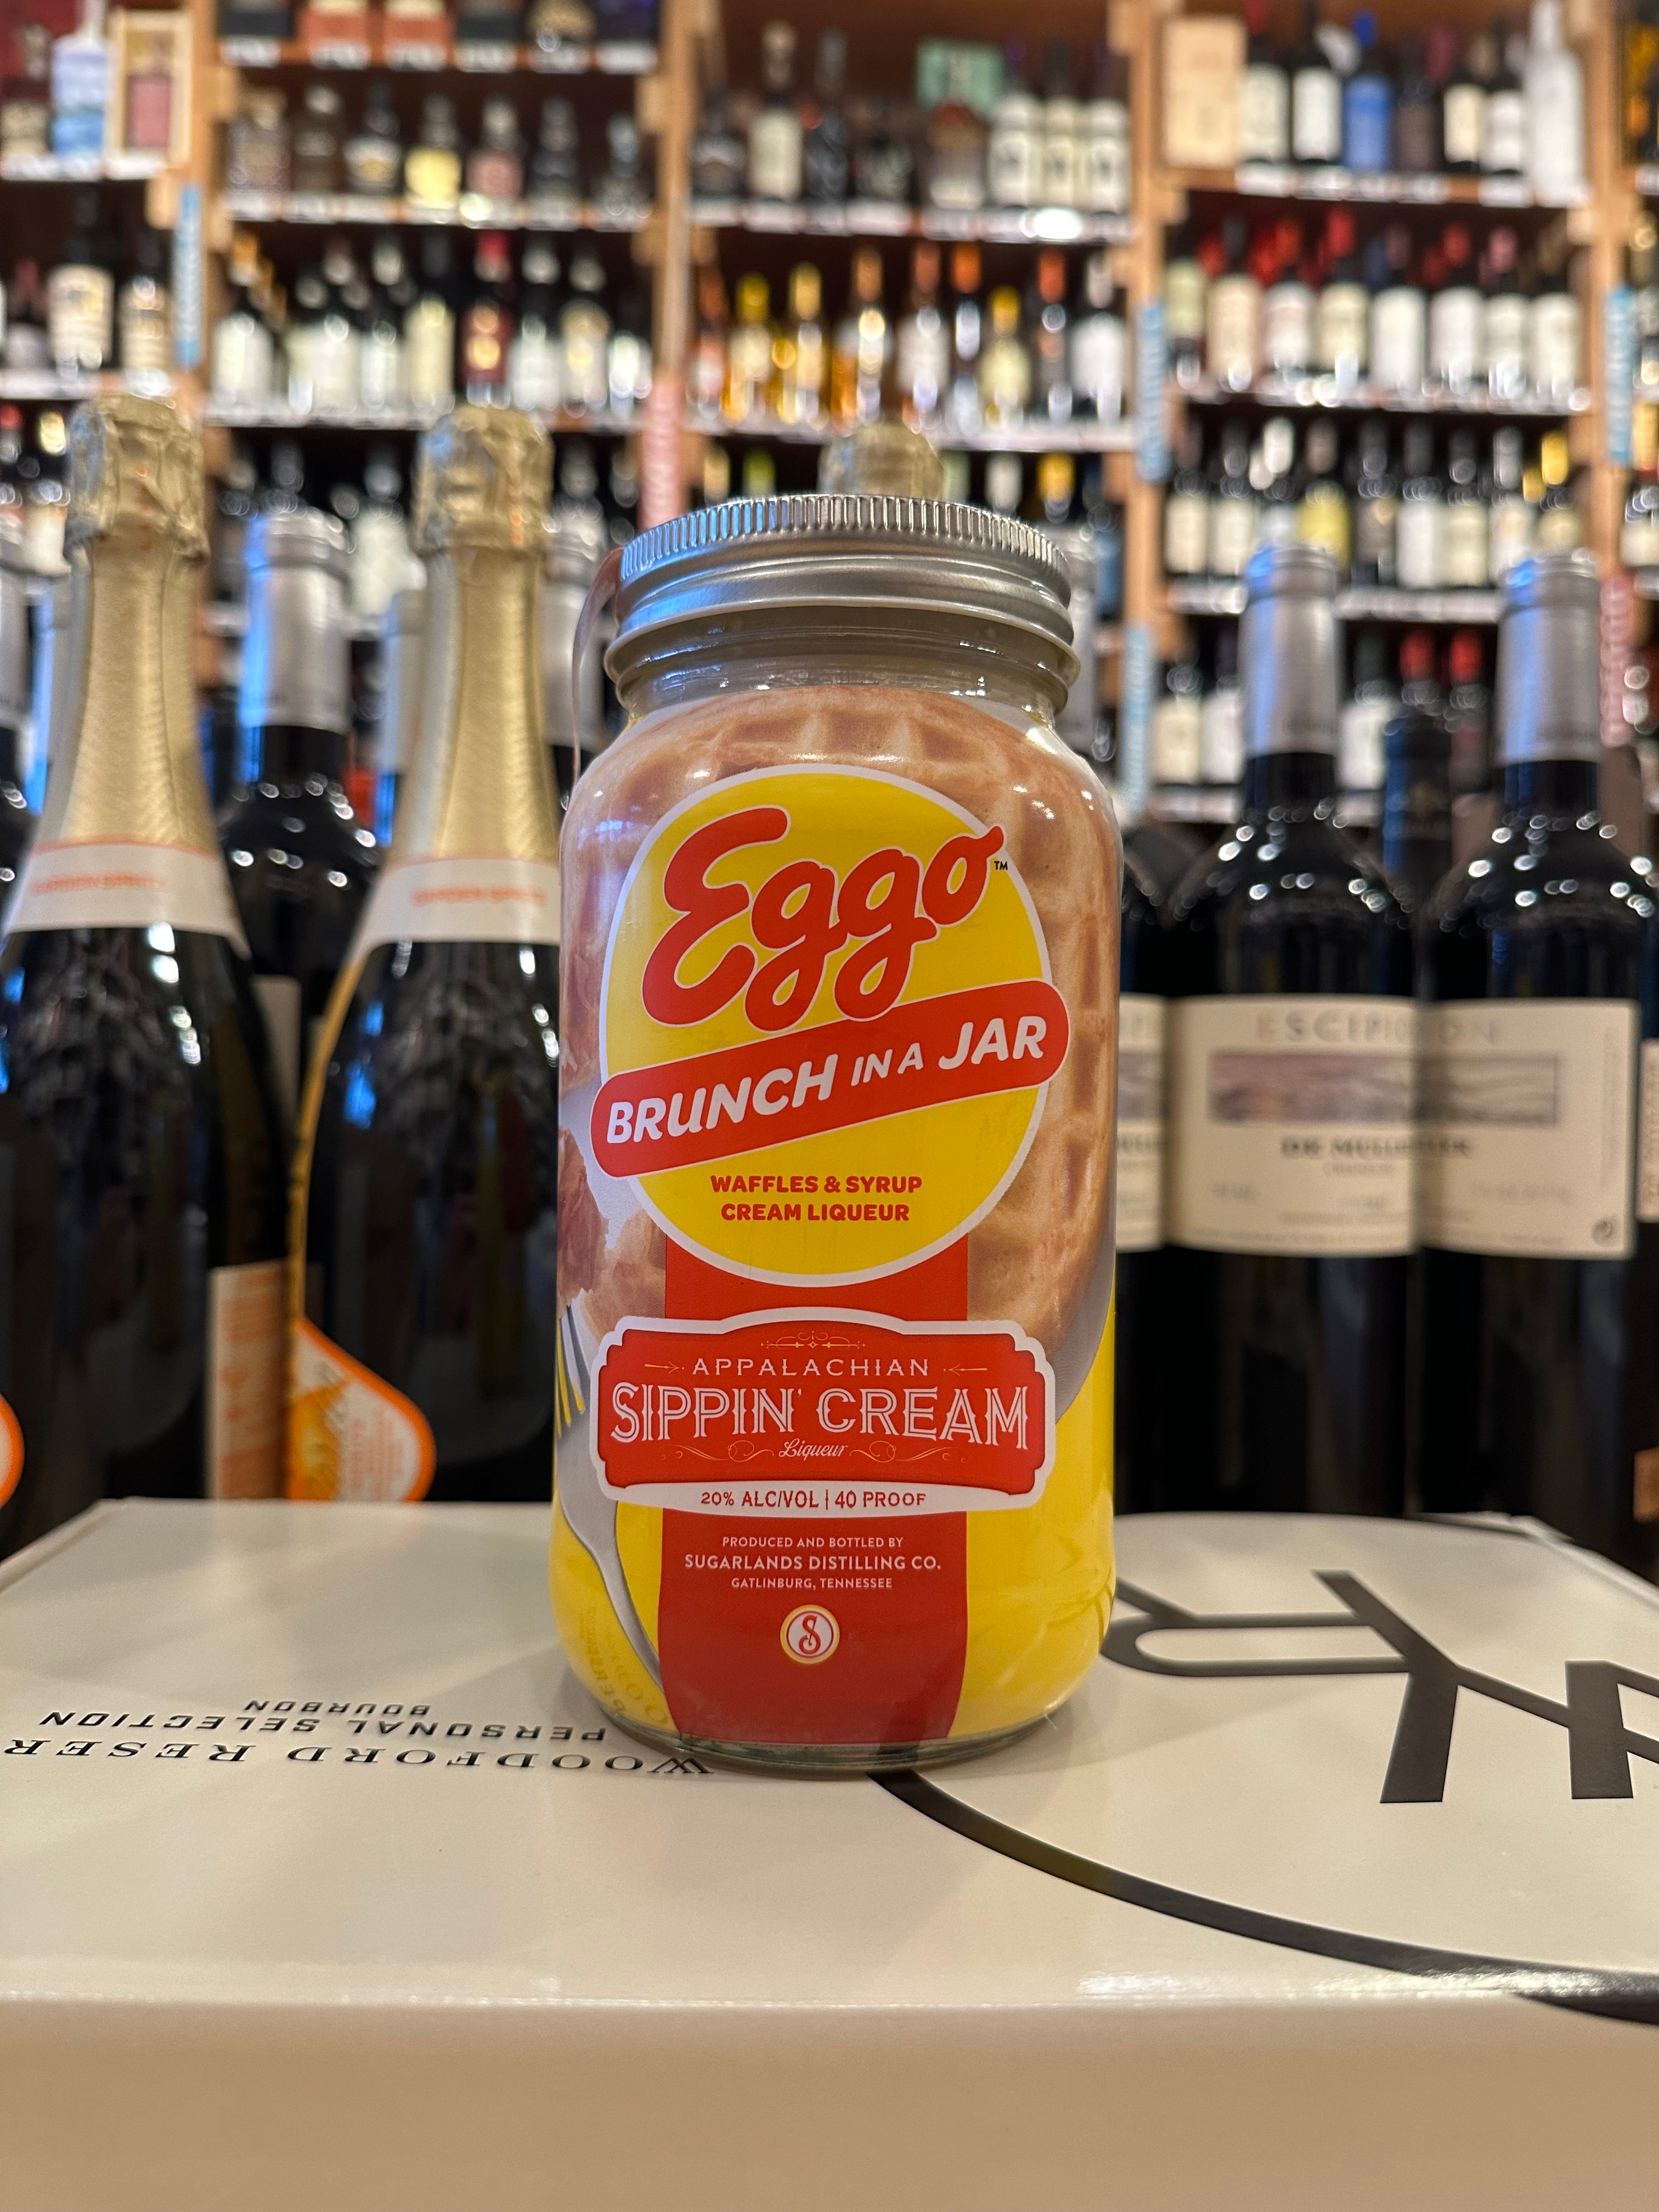 Eggo Brunch in a Jar Appalachian Sippin’ Cream 750mL a mason jar shaped clear glass with a yellow and red label